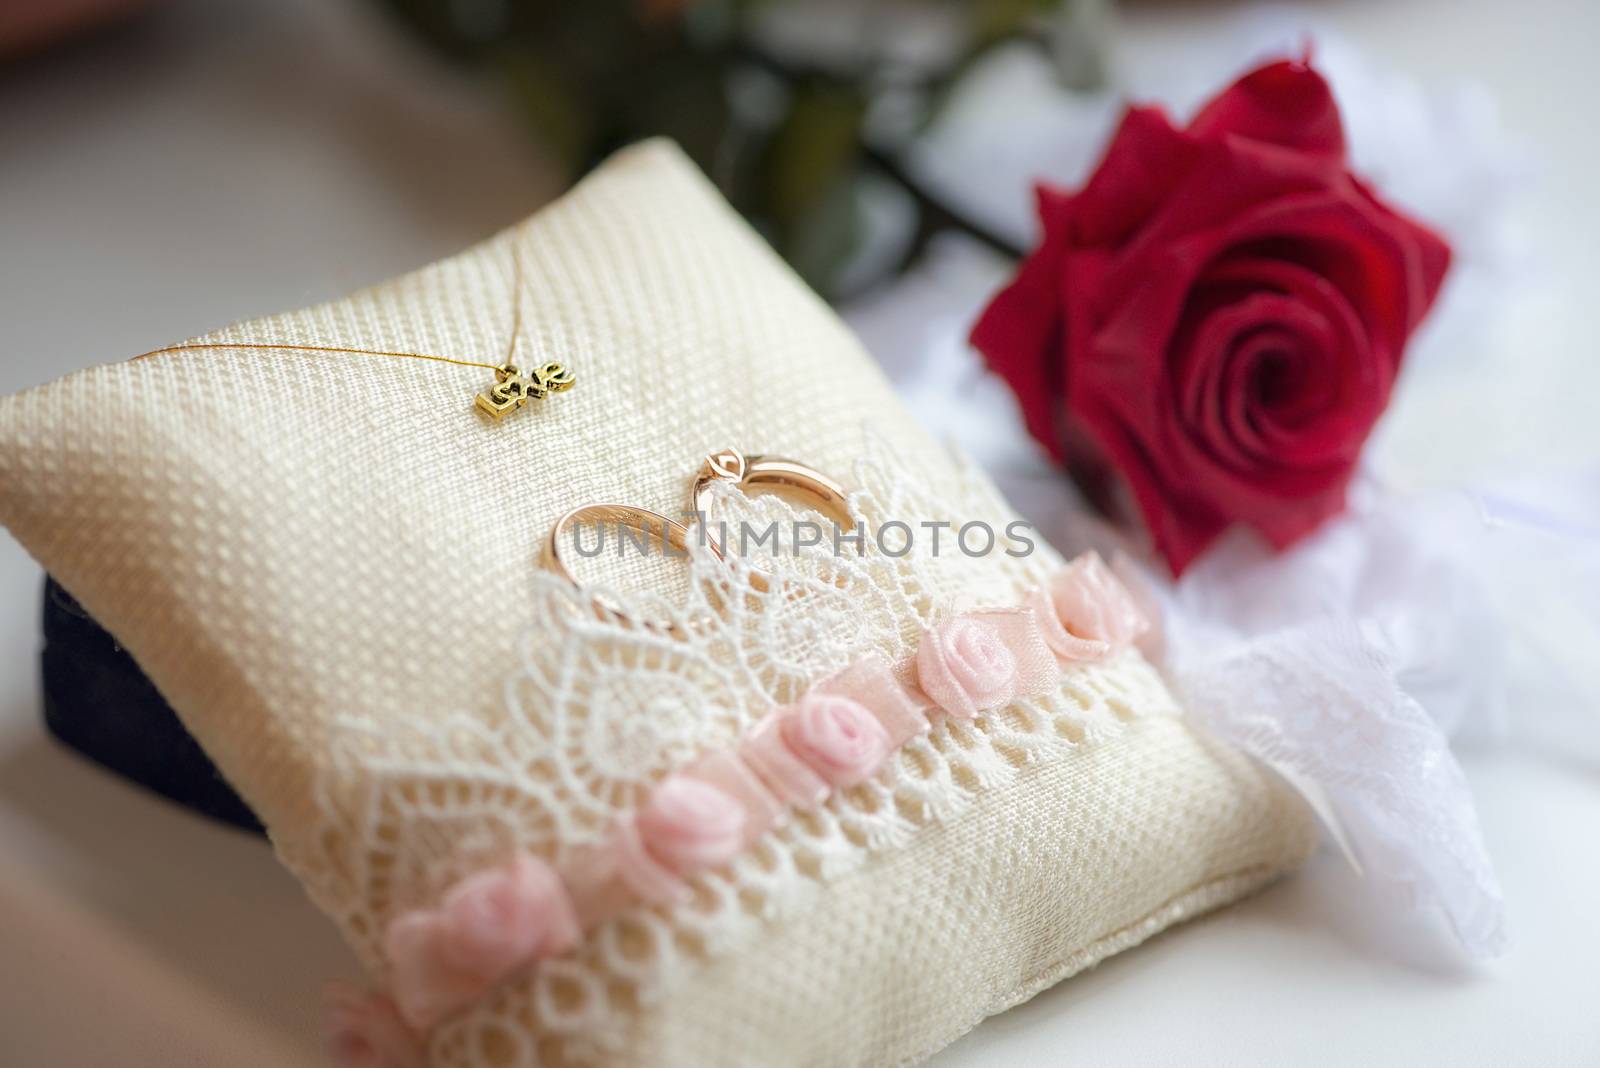 wedding rings on the pad and red rose